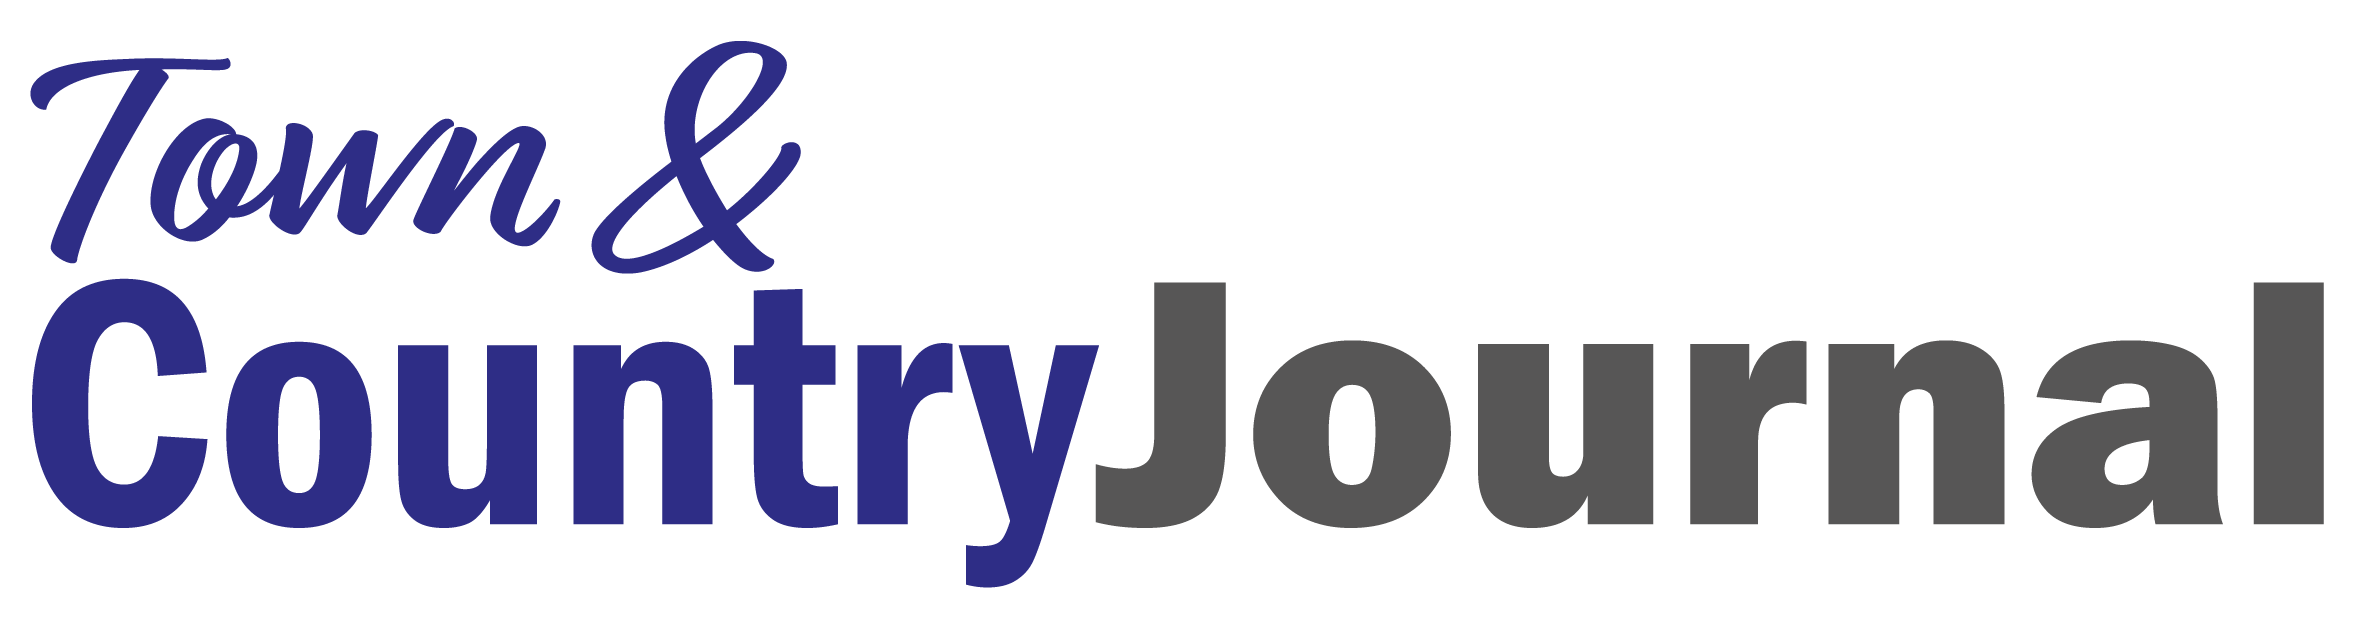 Town & Country Journal Logo